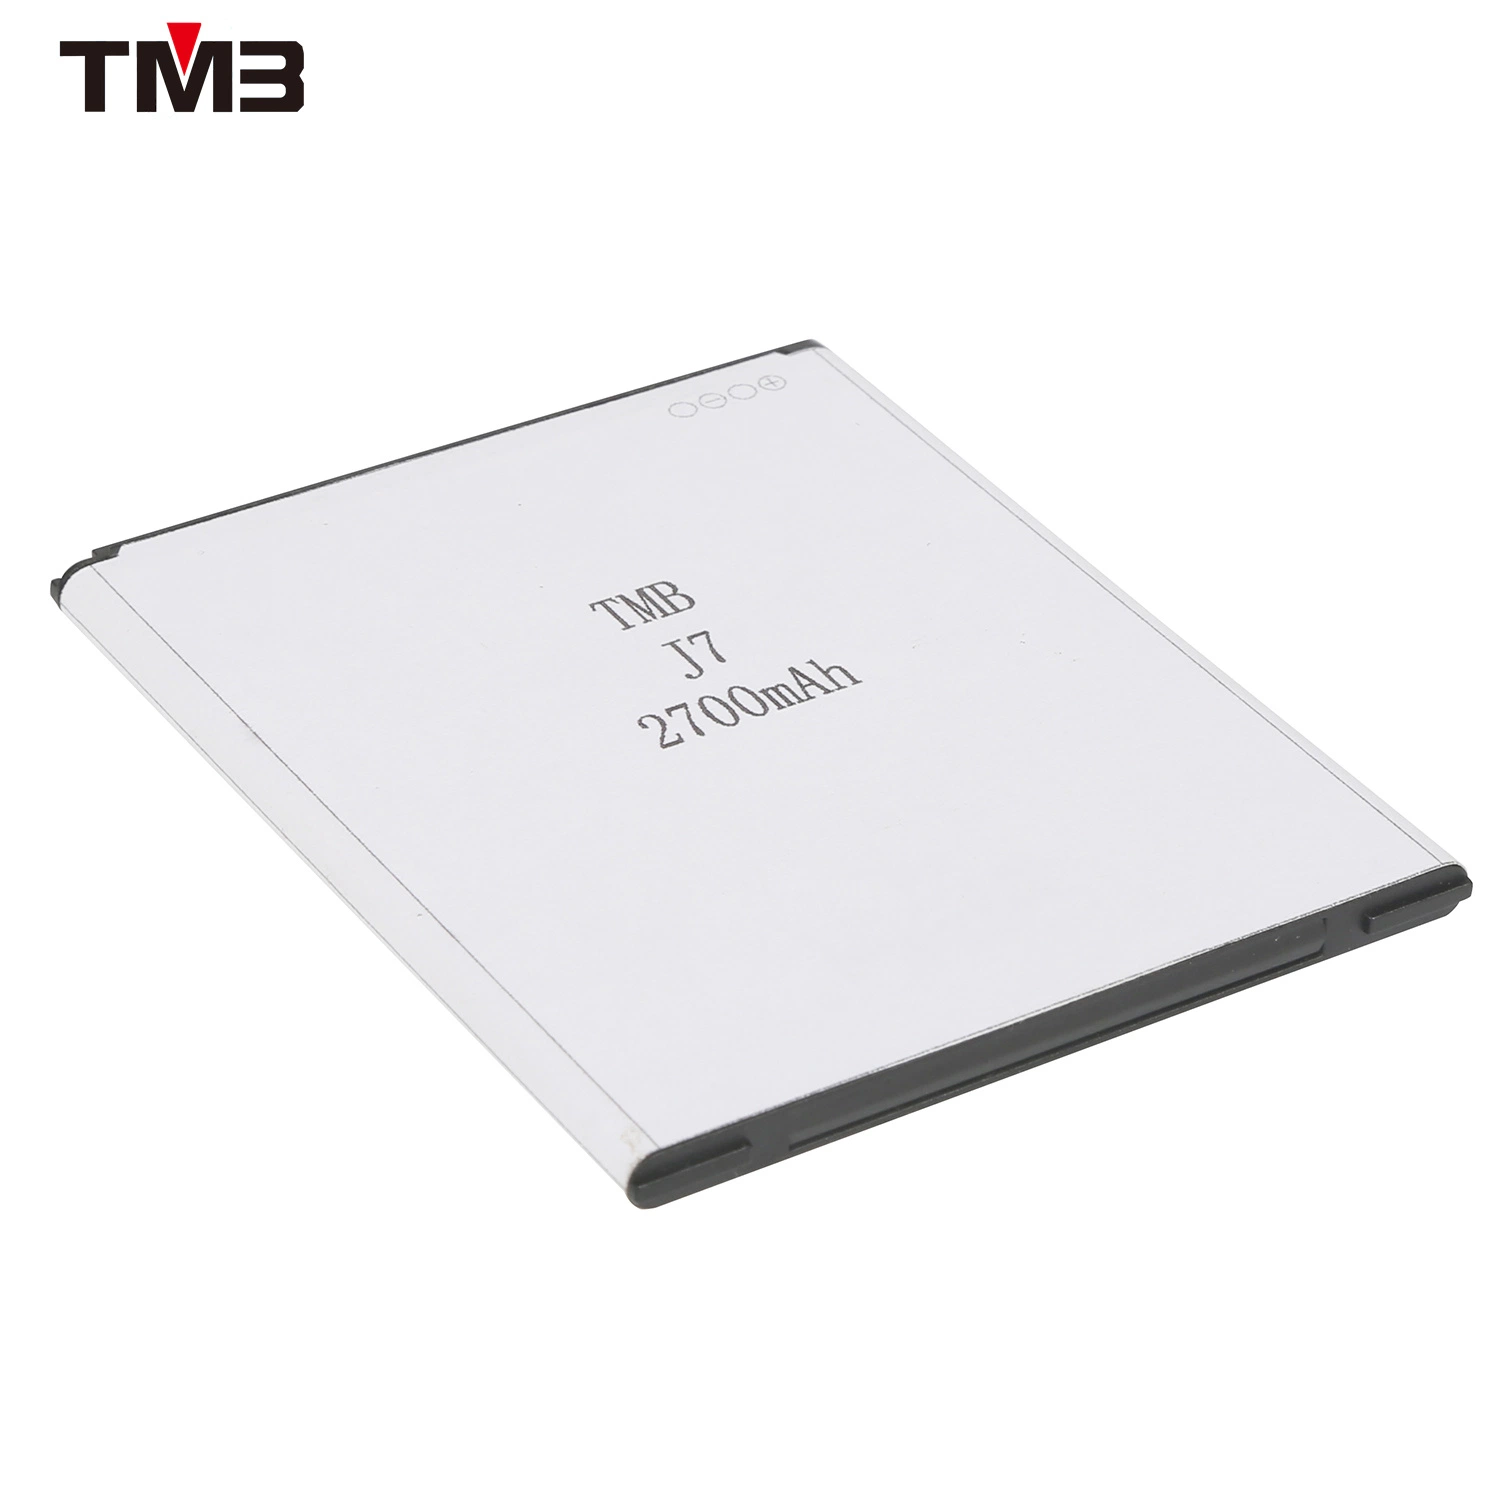 Rechargeable Lithium Ion Battery for Mobile Phone J7 and 3c Digital